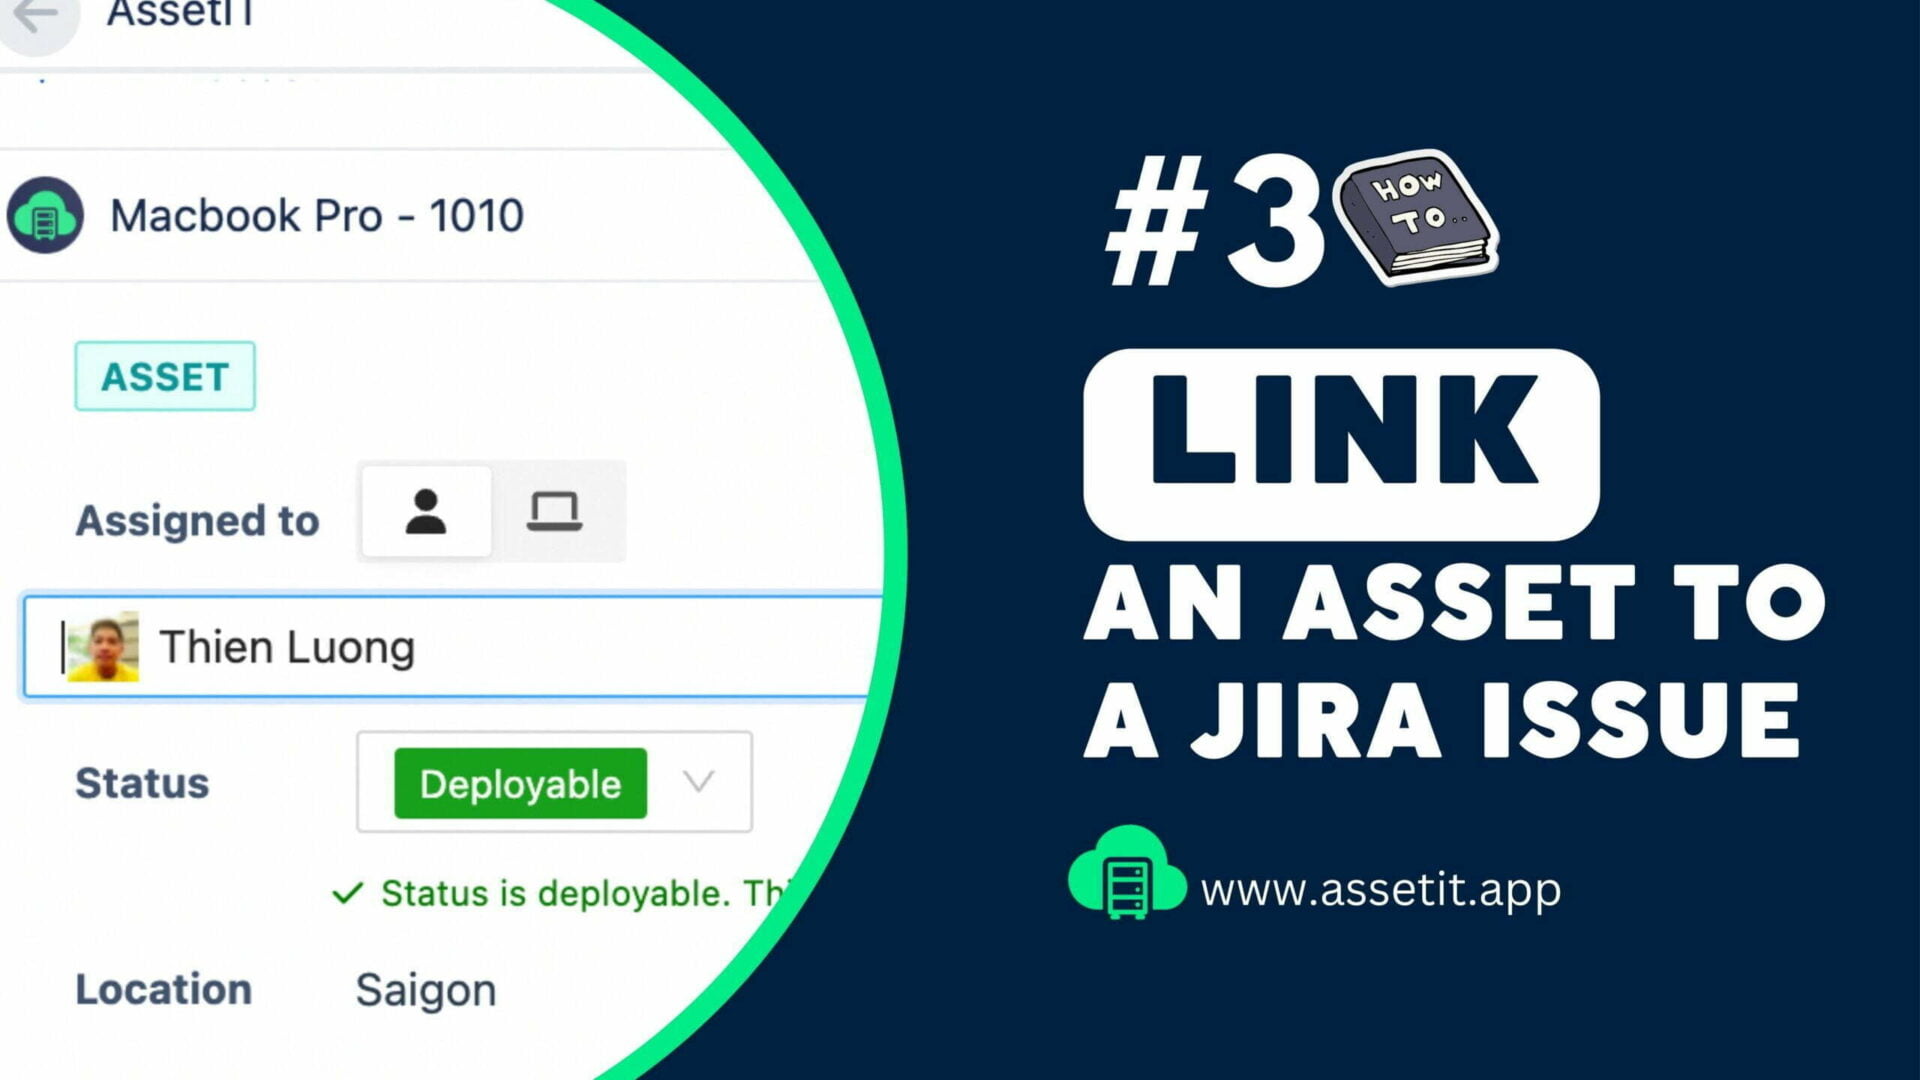 how to link an asset to a Jira issue on Asset IT | IT Asset Management for Jira